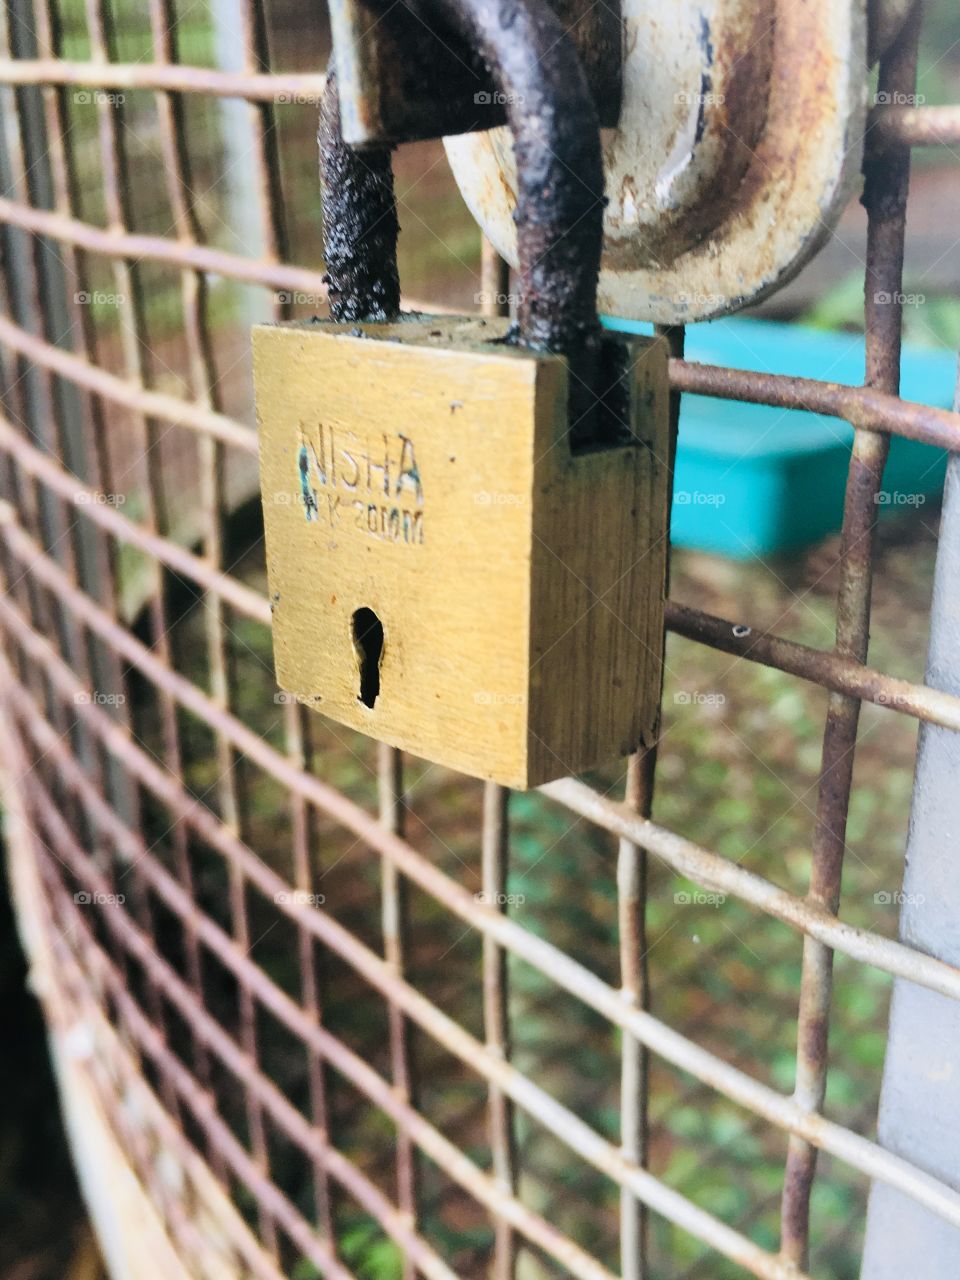 A lock that is locked 